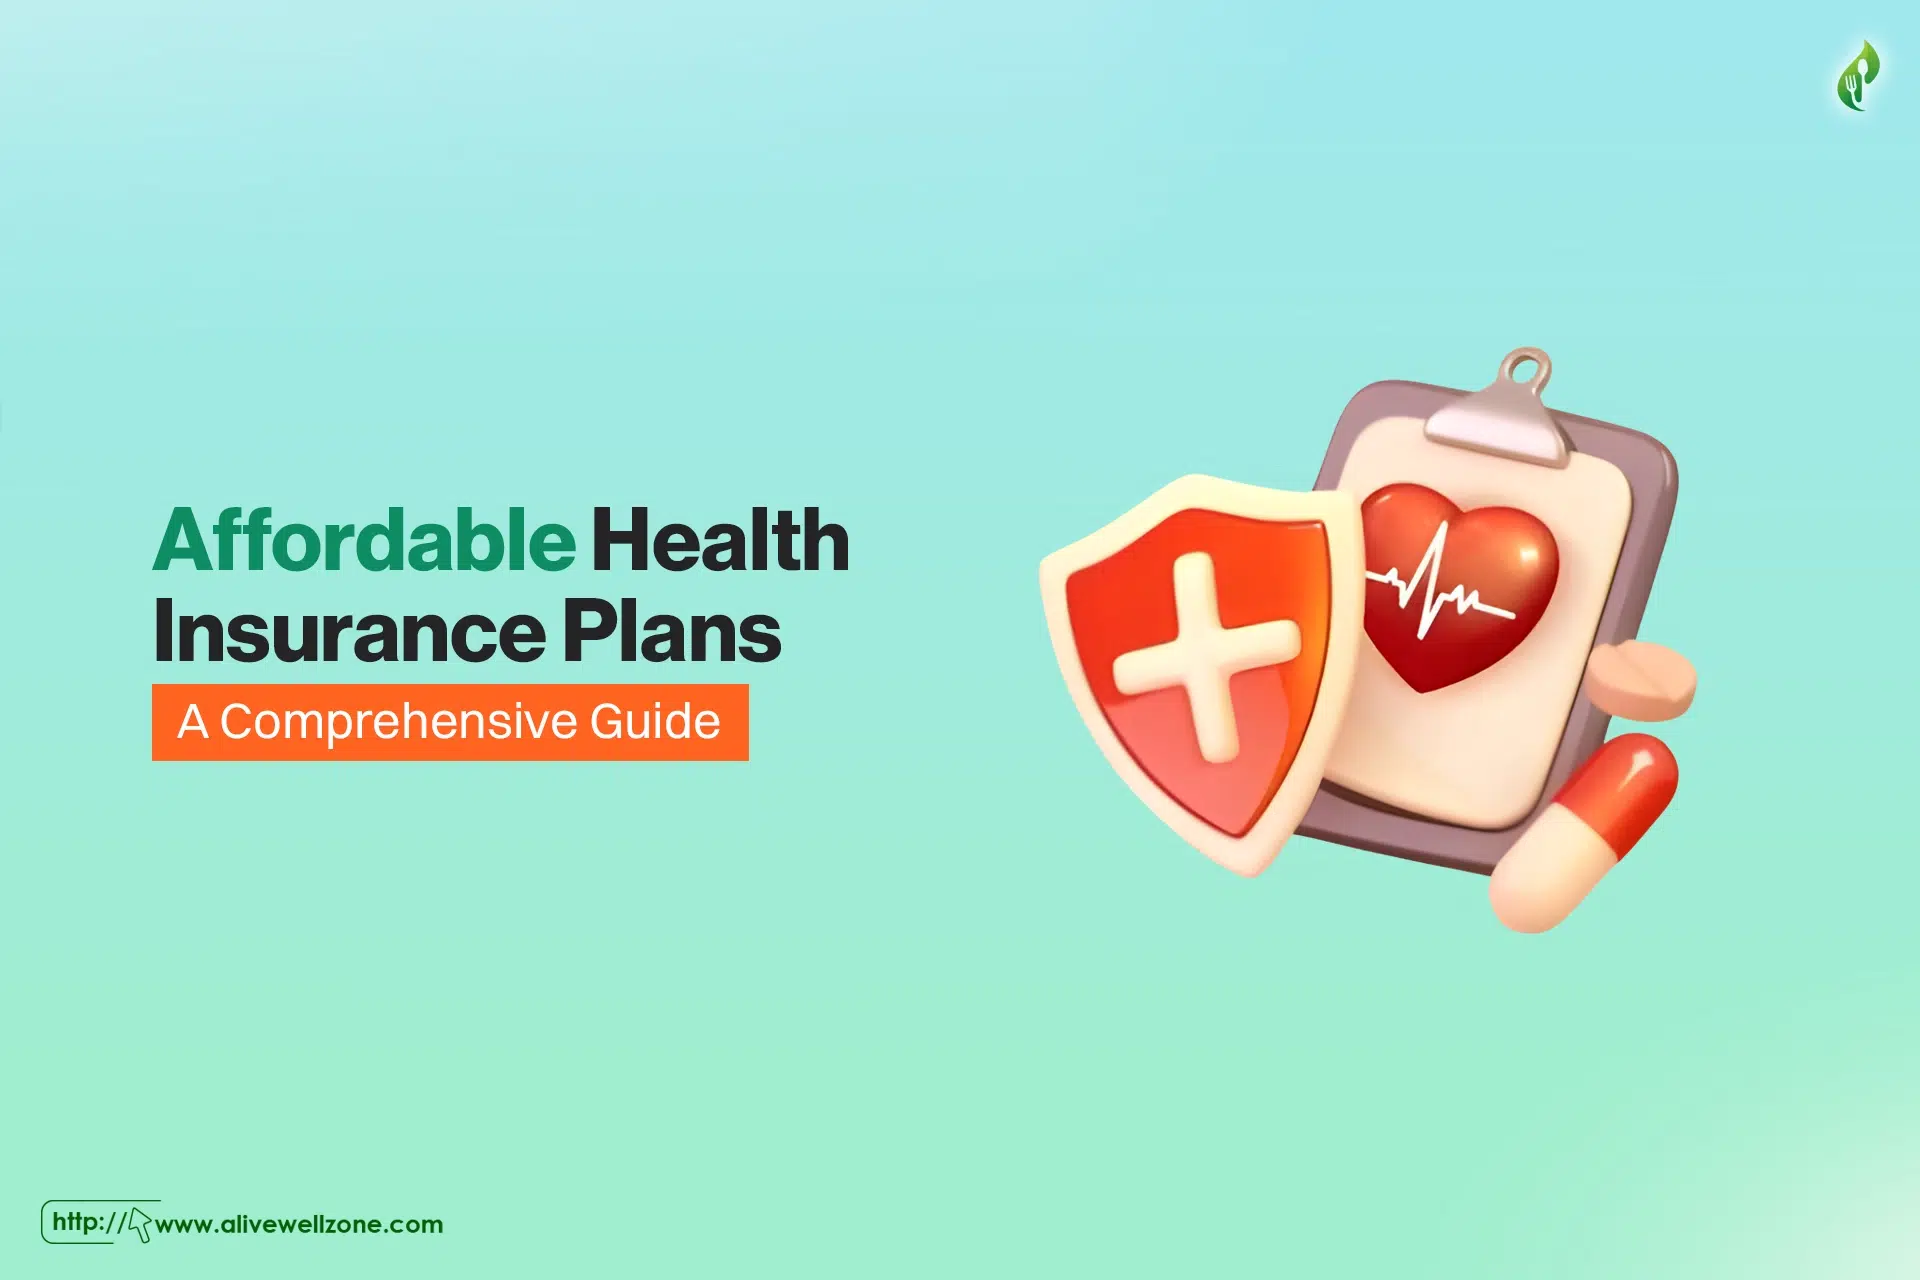 A Comprehensive Guide: Affordable Health Insurance Plans